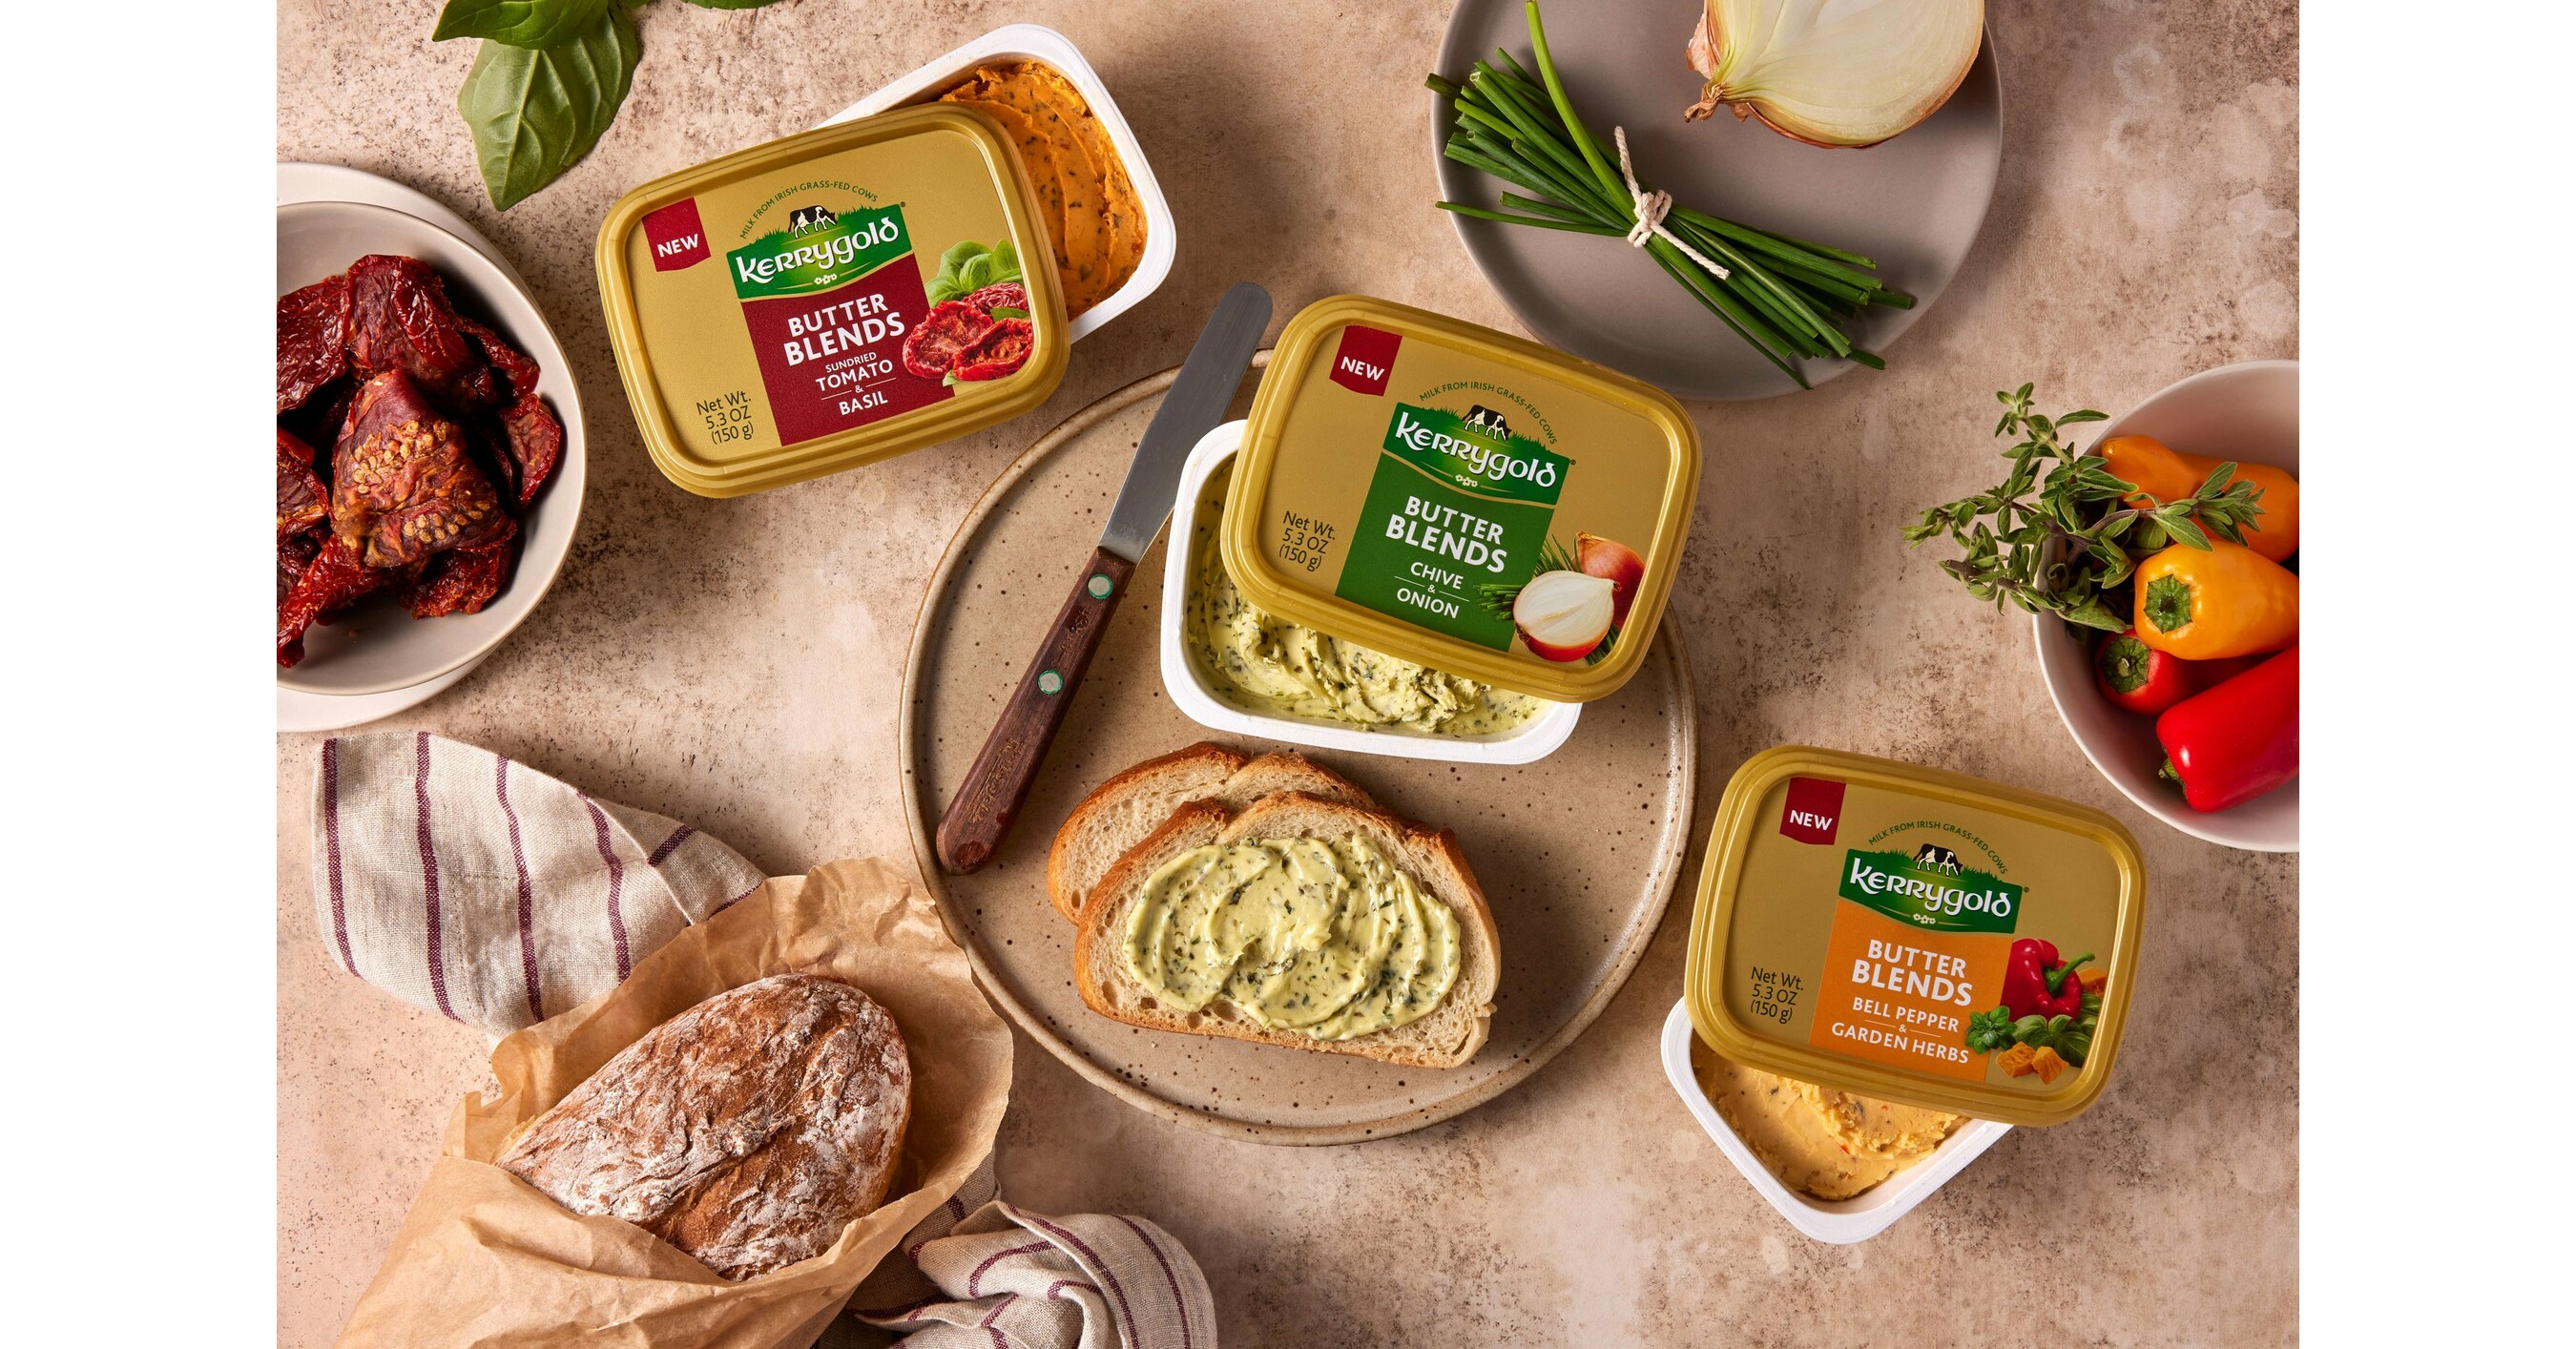 Kerrygold launches Irish butter with olive oil